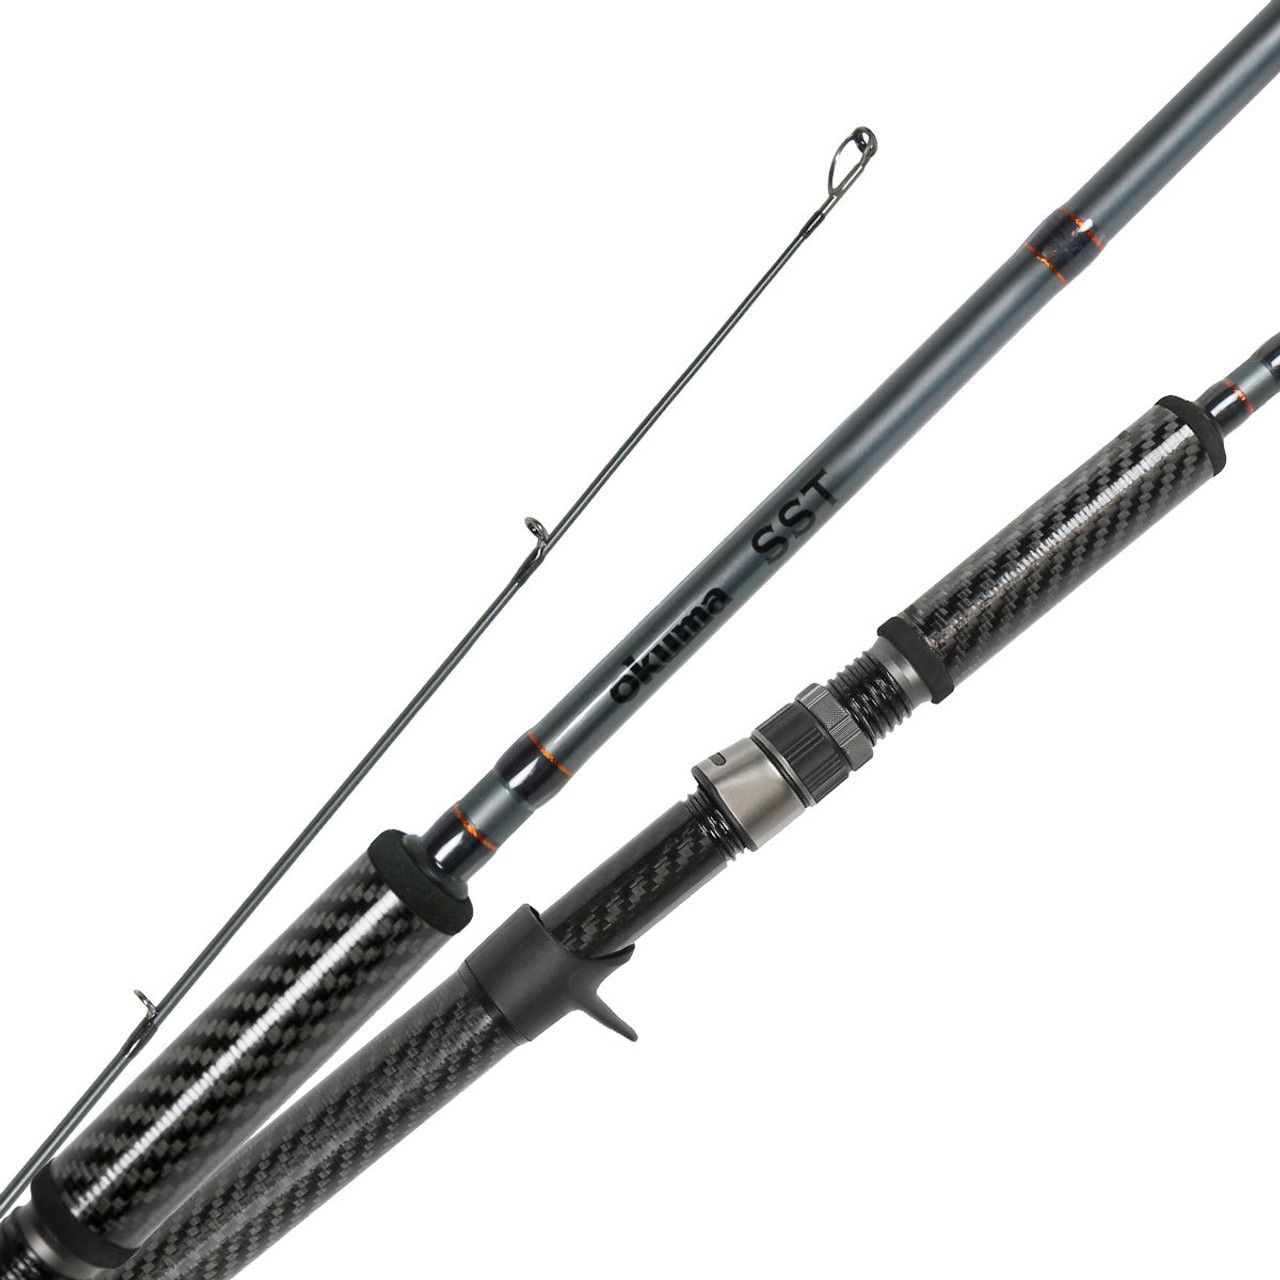 Okuma SST New Moderate Action Fishing rod with carbon grip MH 10